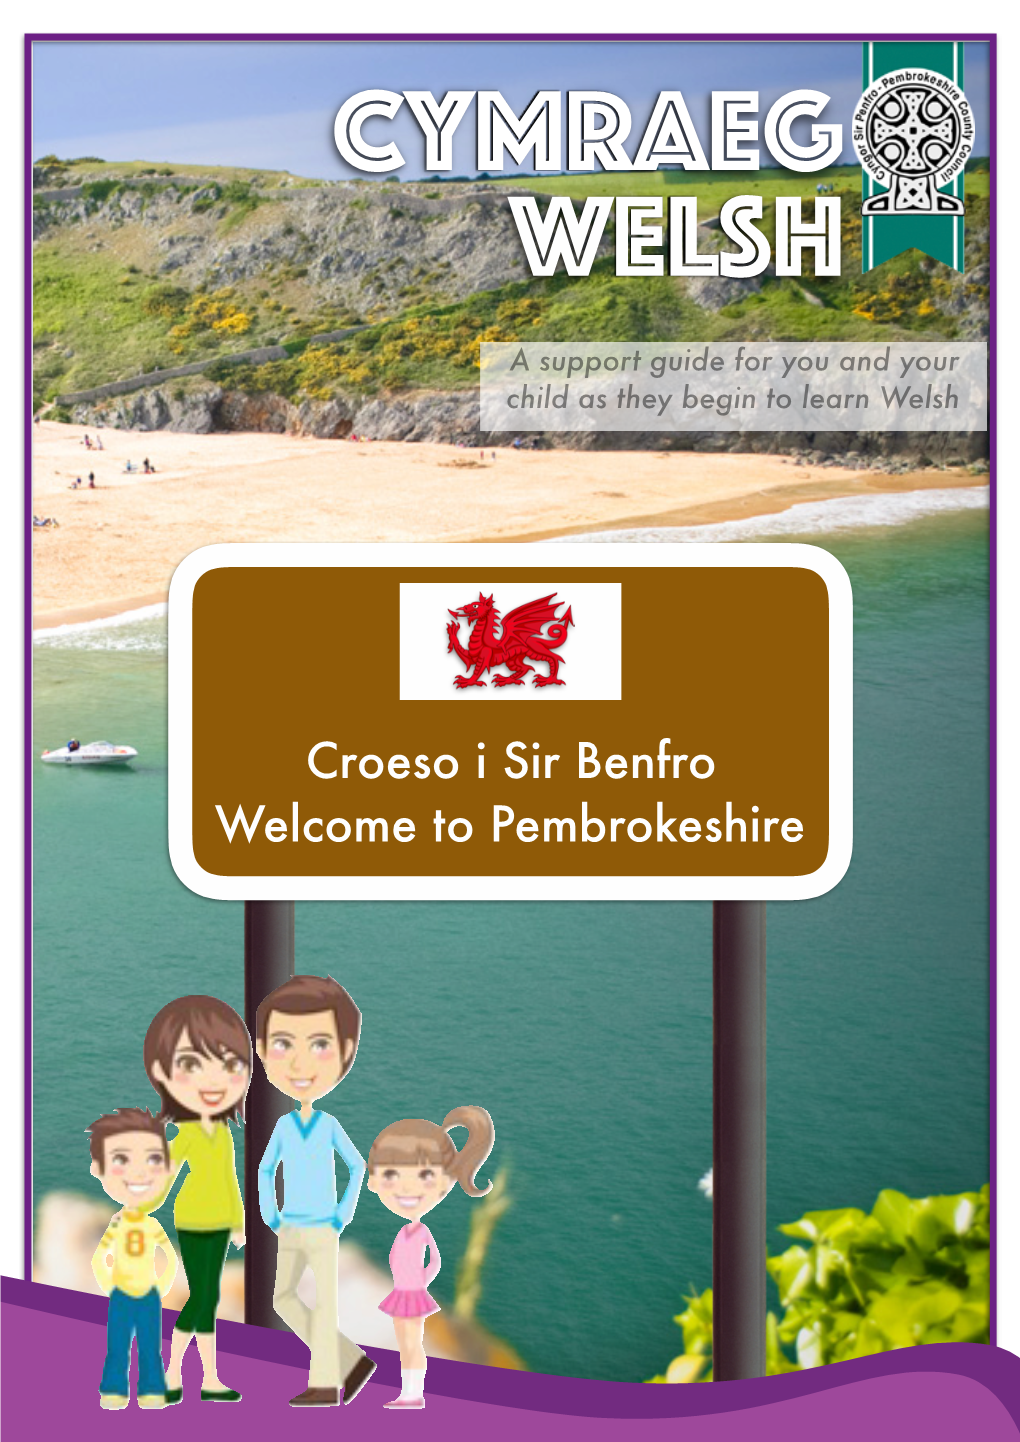 Introduction to Wales and Welsh